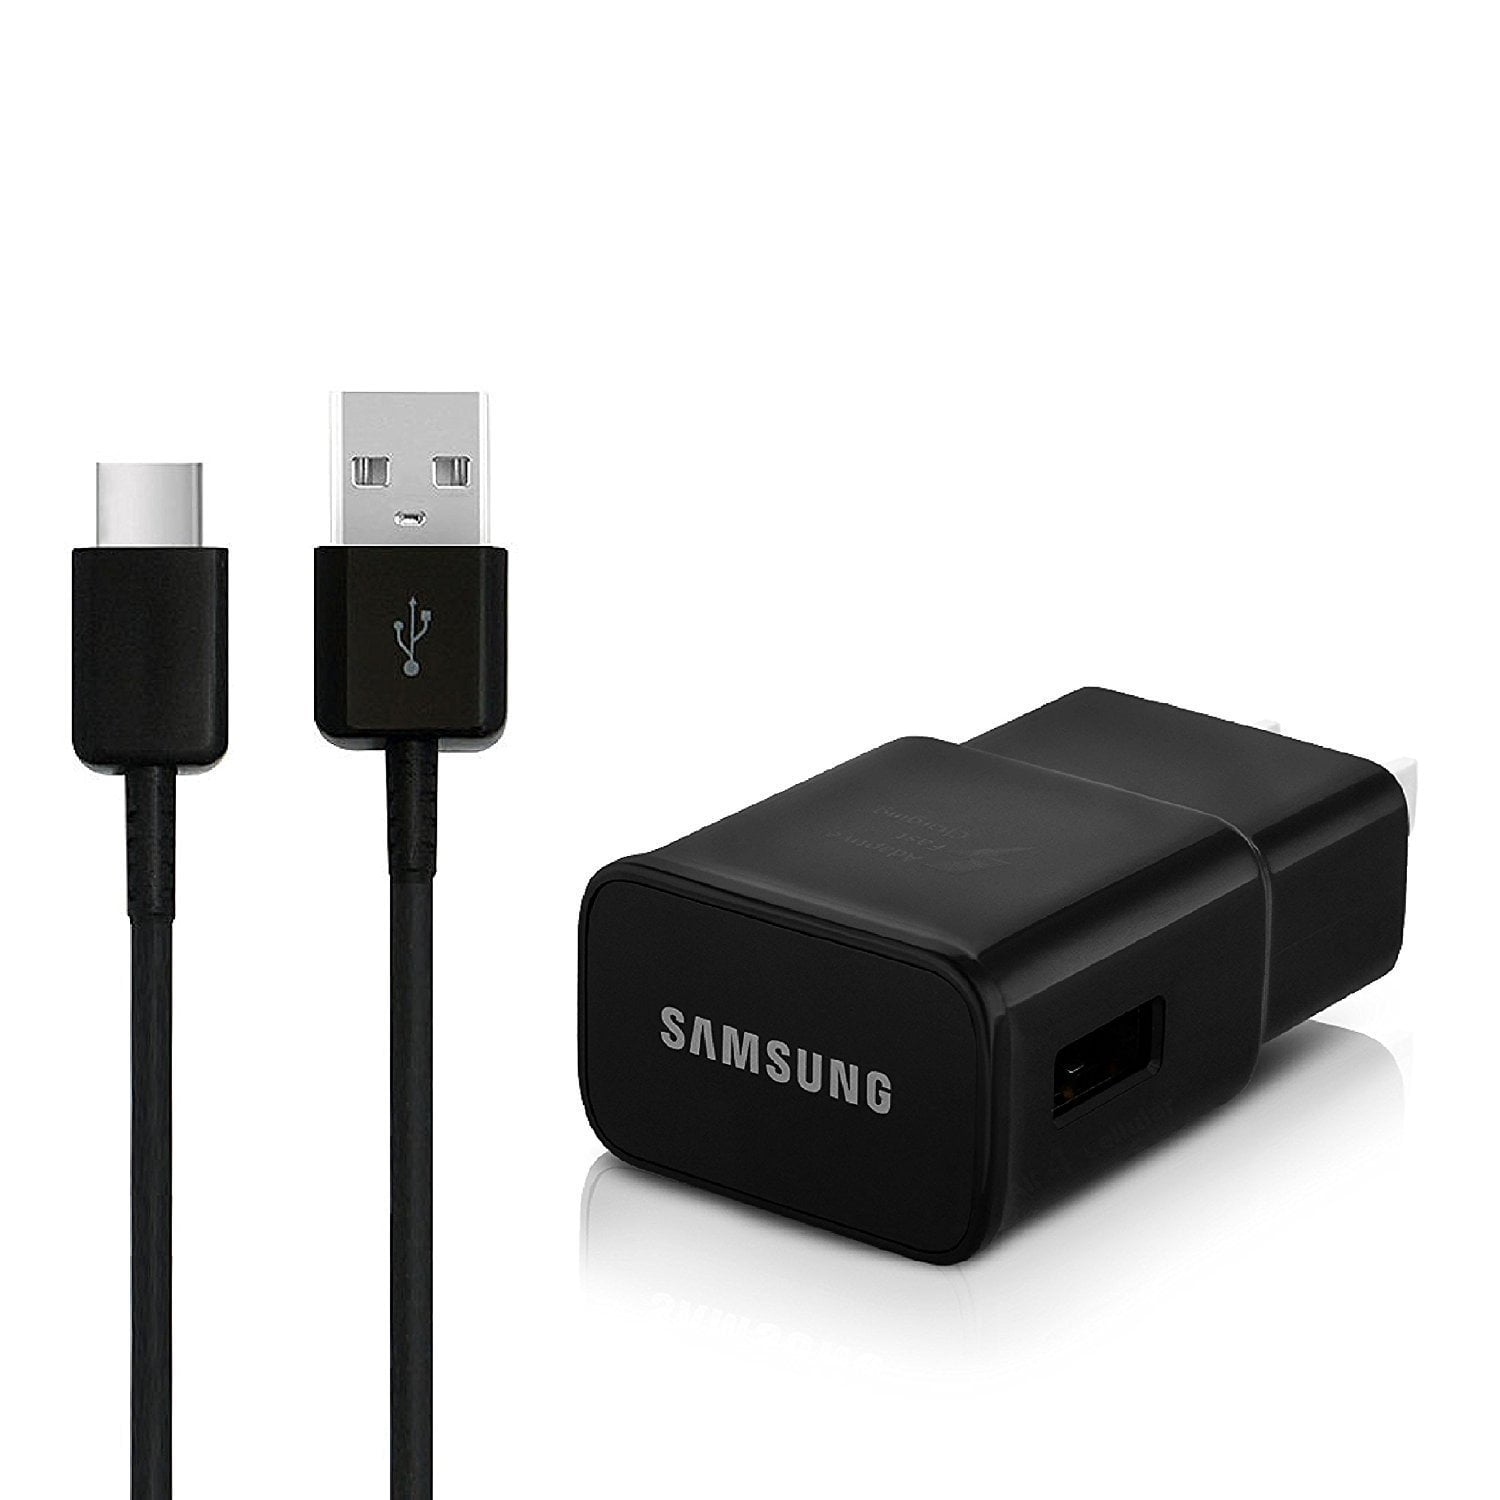 For Samsung Galaxy S8 Active Adaptive Fast Charger Type-C USB Cable Kit! [1  Home Charger + Type-C USB Cable] Adaptive Fast Charging uses dual voltages  for up to 50% faster charging! BLACK -